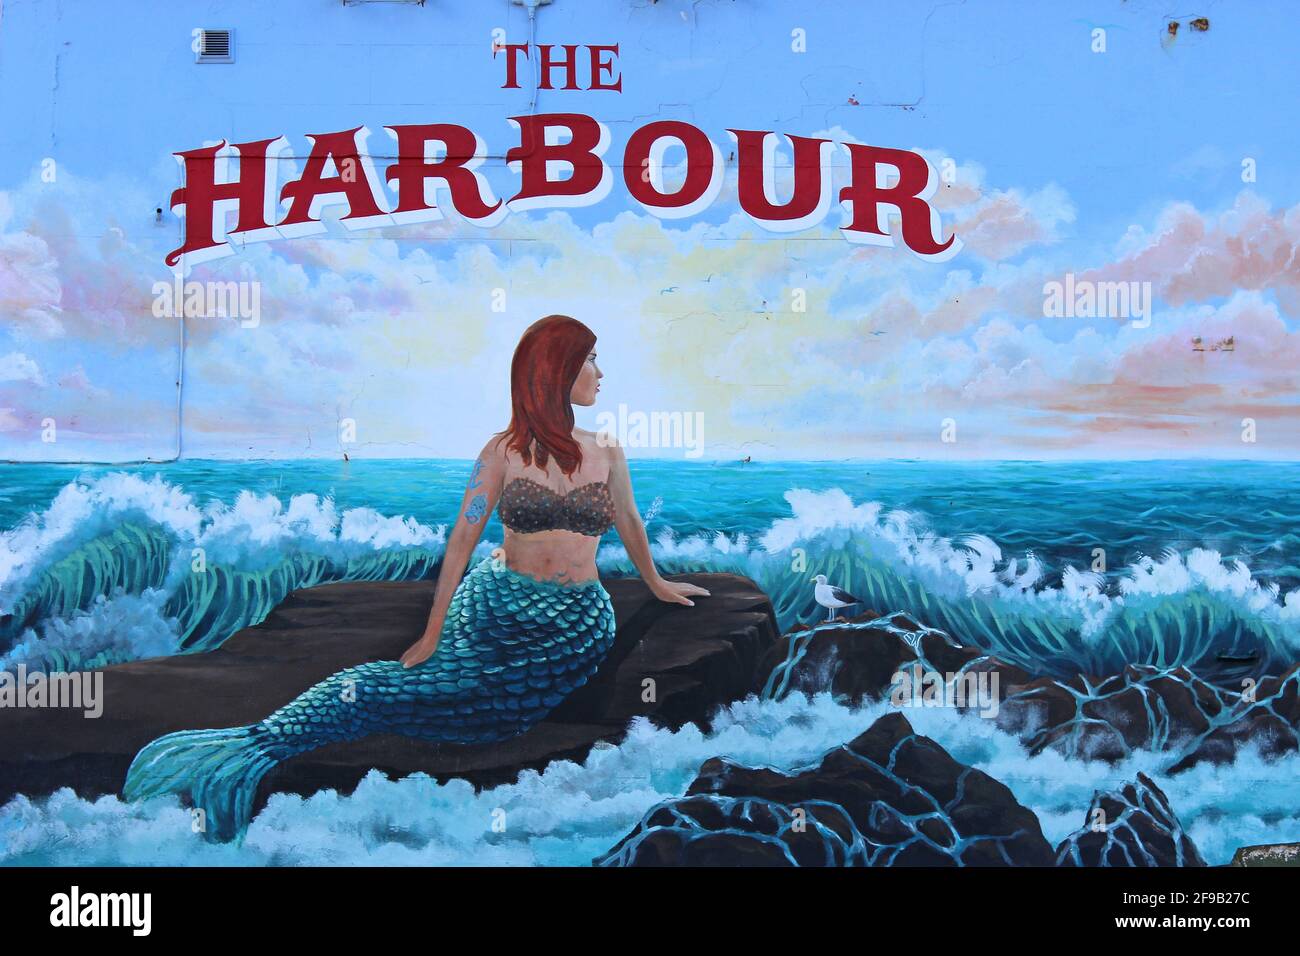 Mermaid Artwork on the Harbour Pub, New Brighton, Wirral, Royaume-Uni Banque D'Images